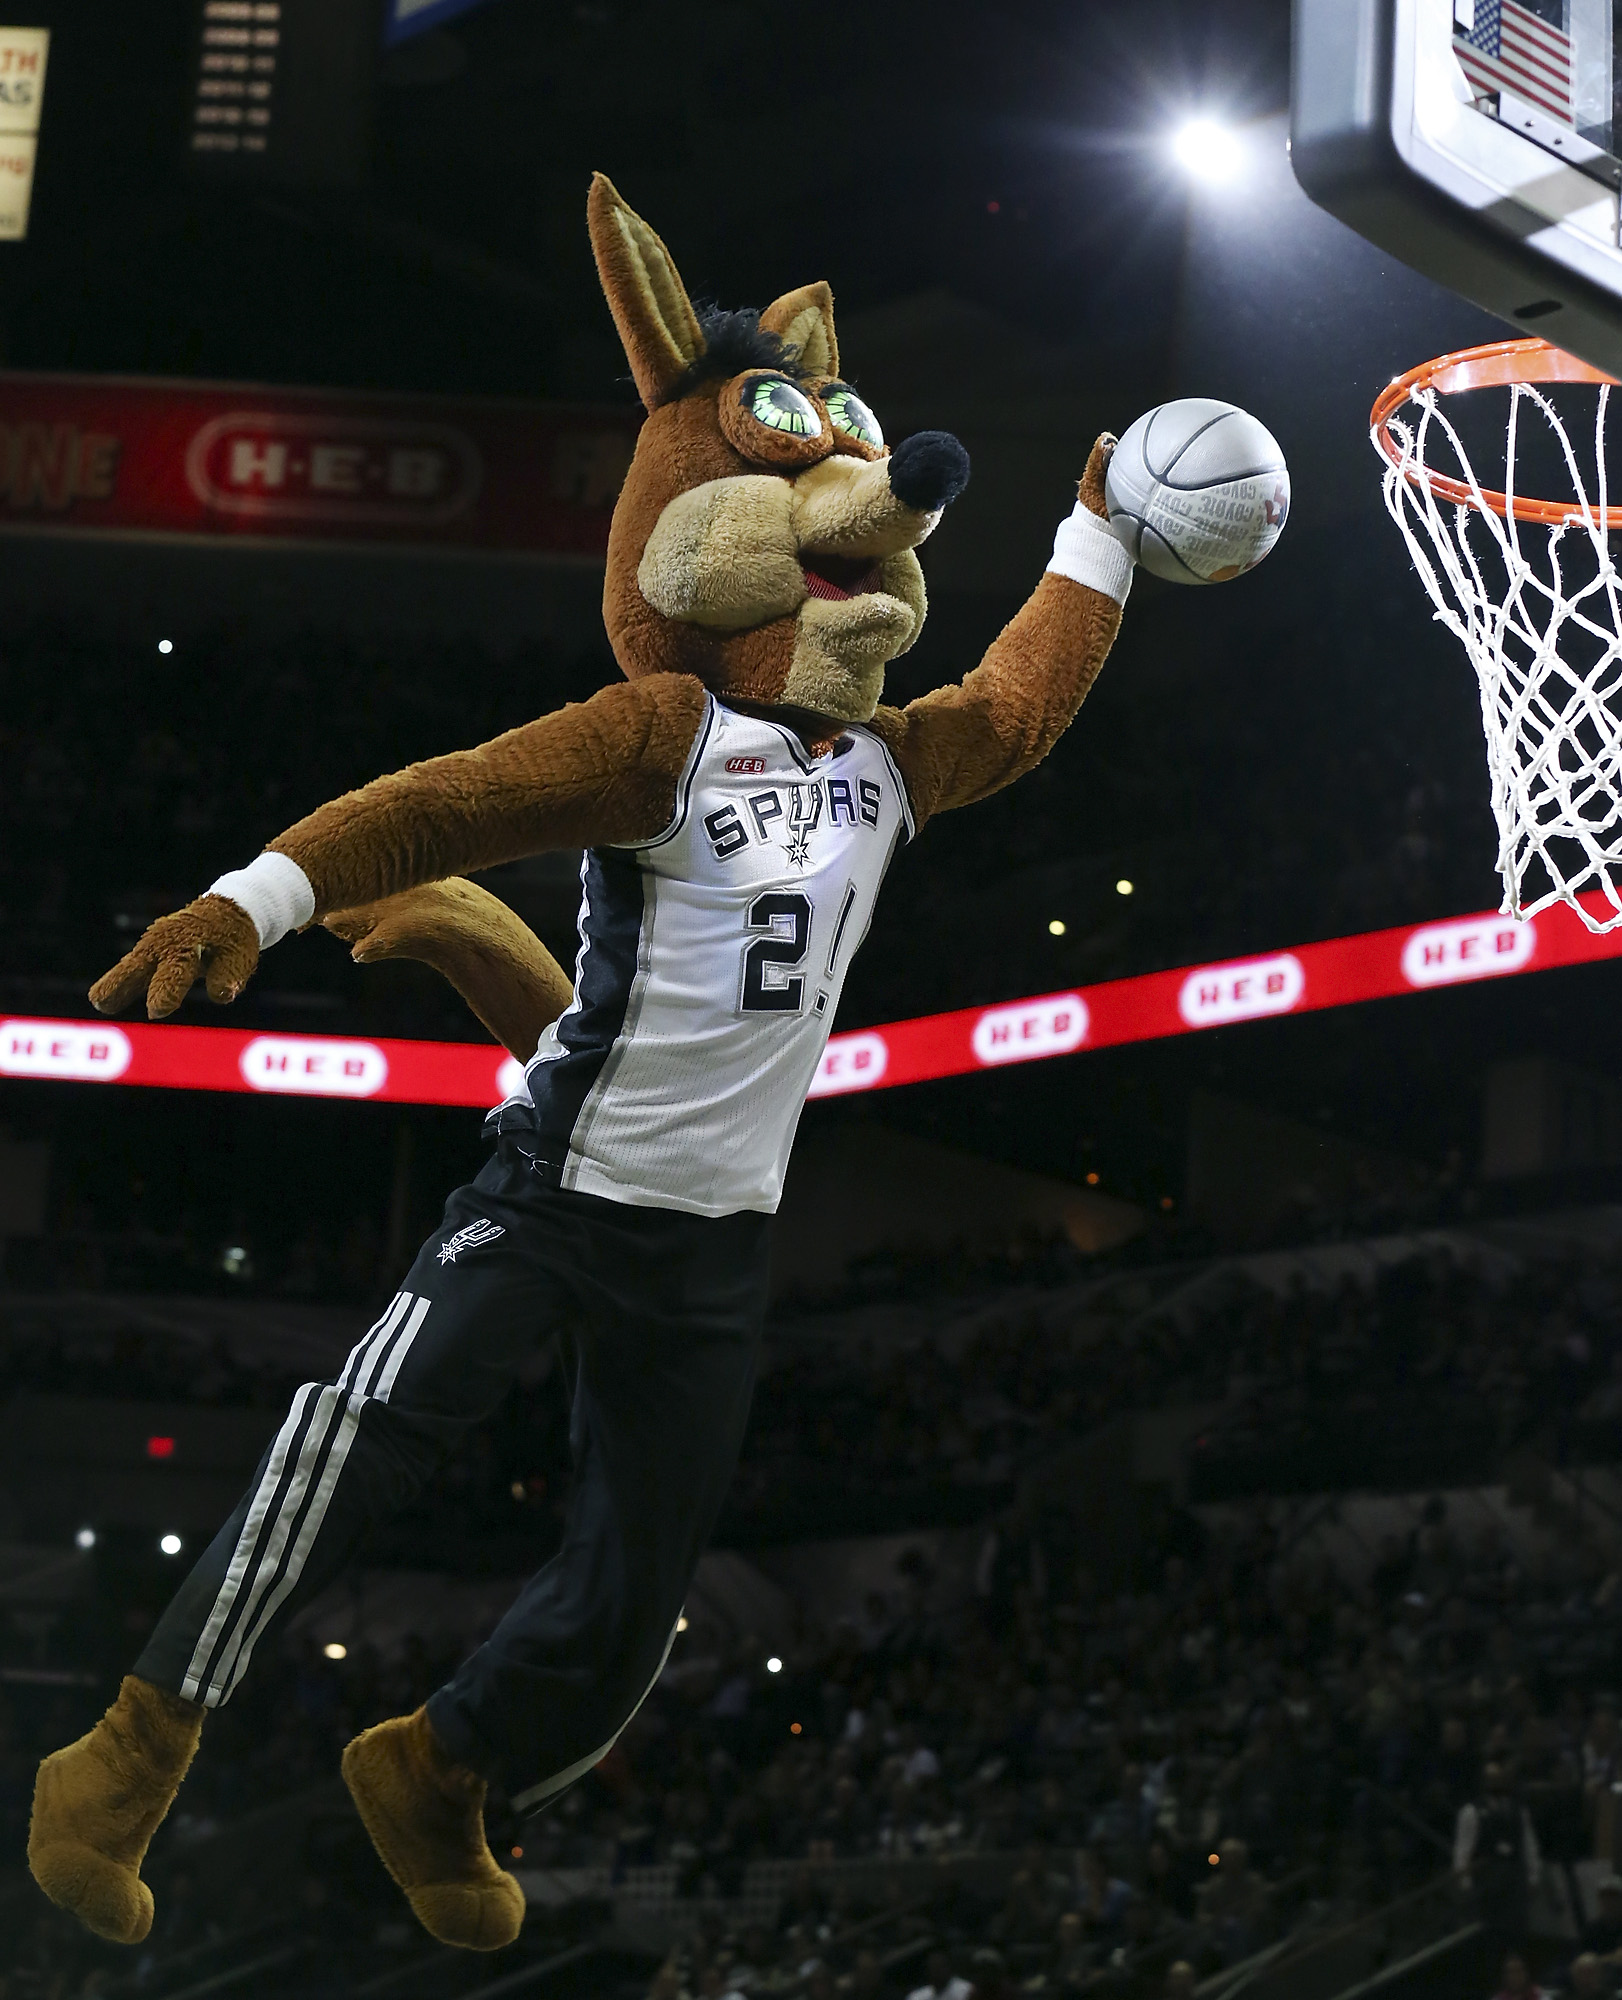 Spurs coyote mascot dressed as Batman nets a real bat - not making this up